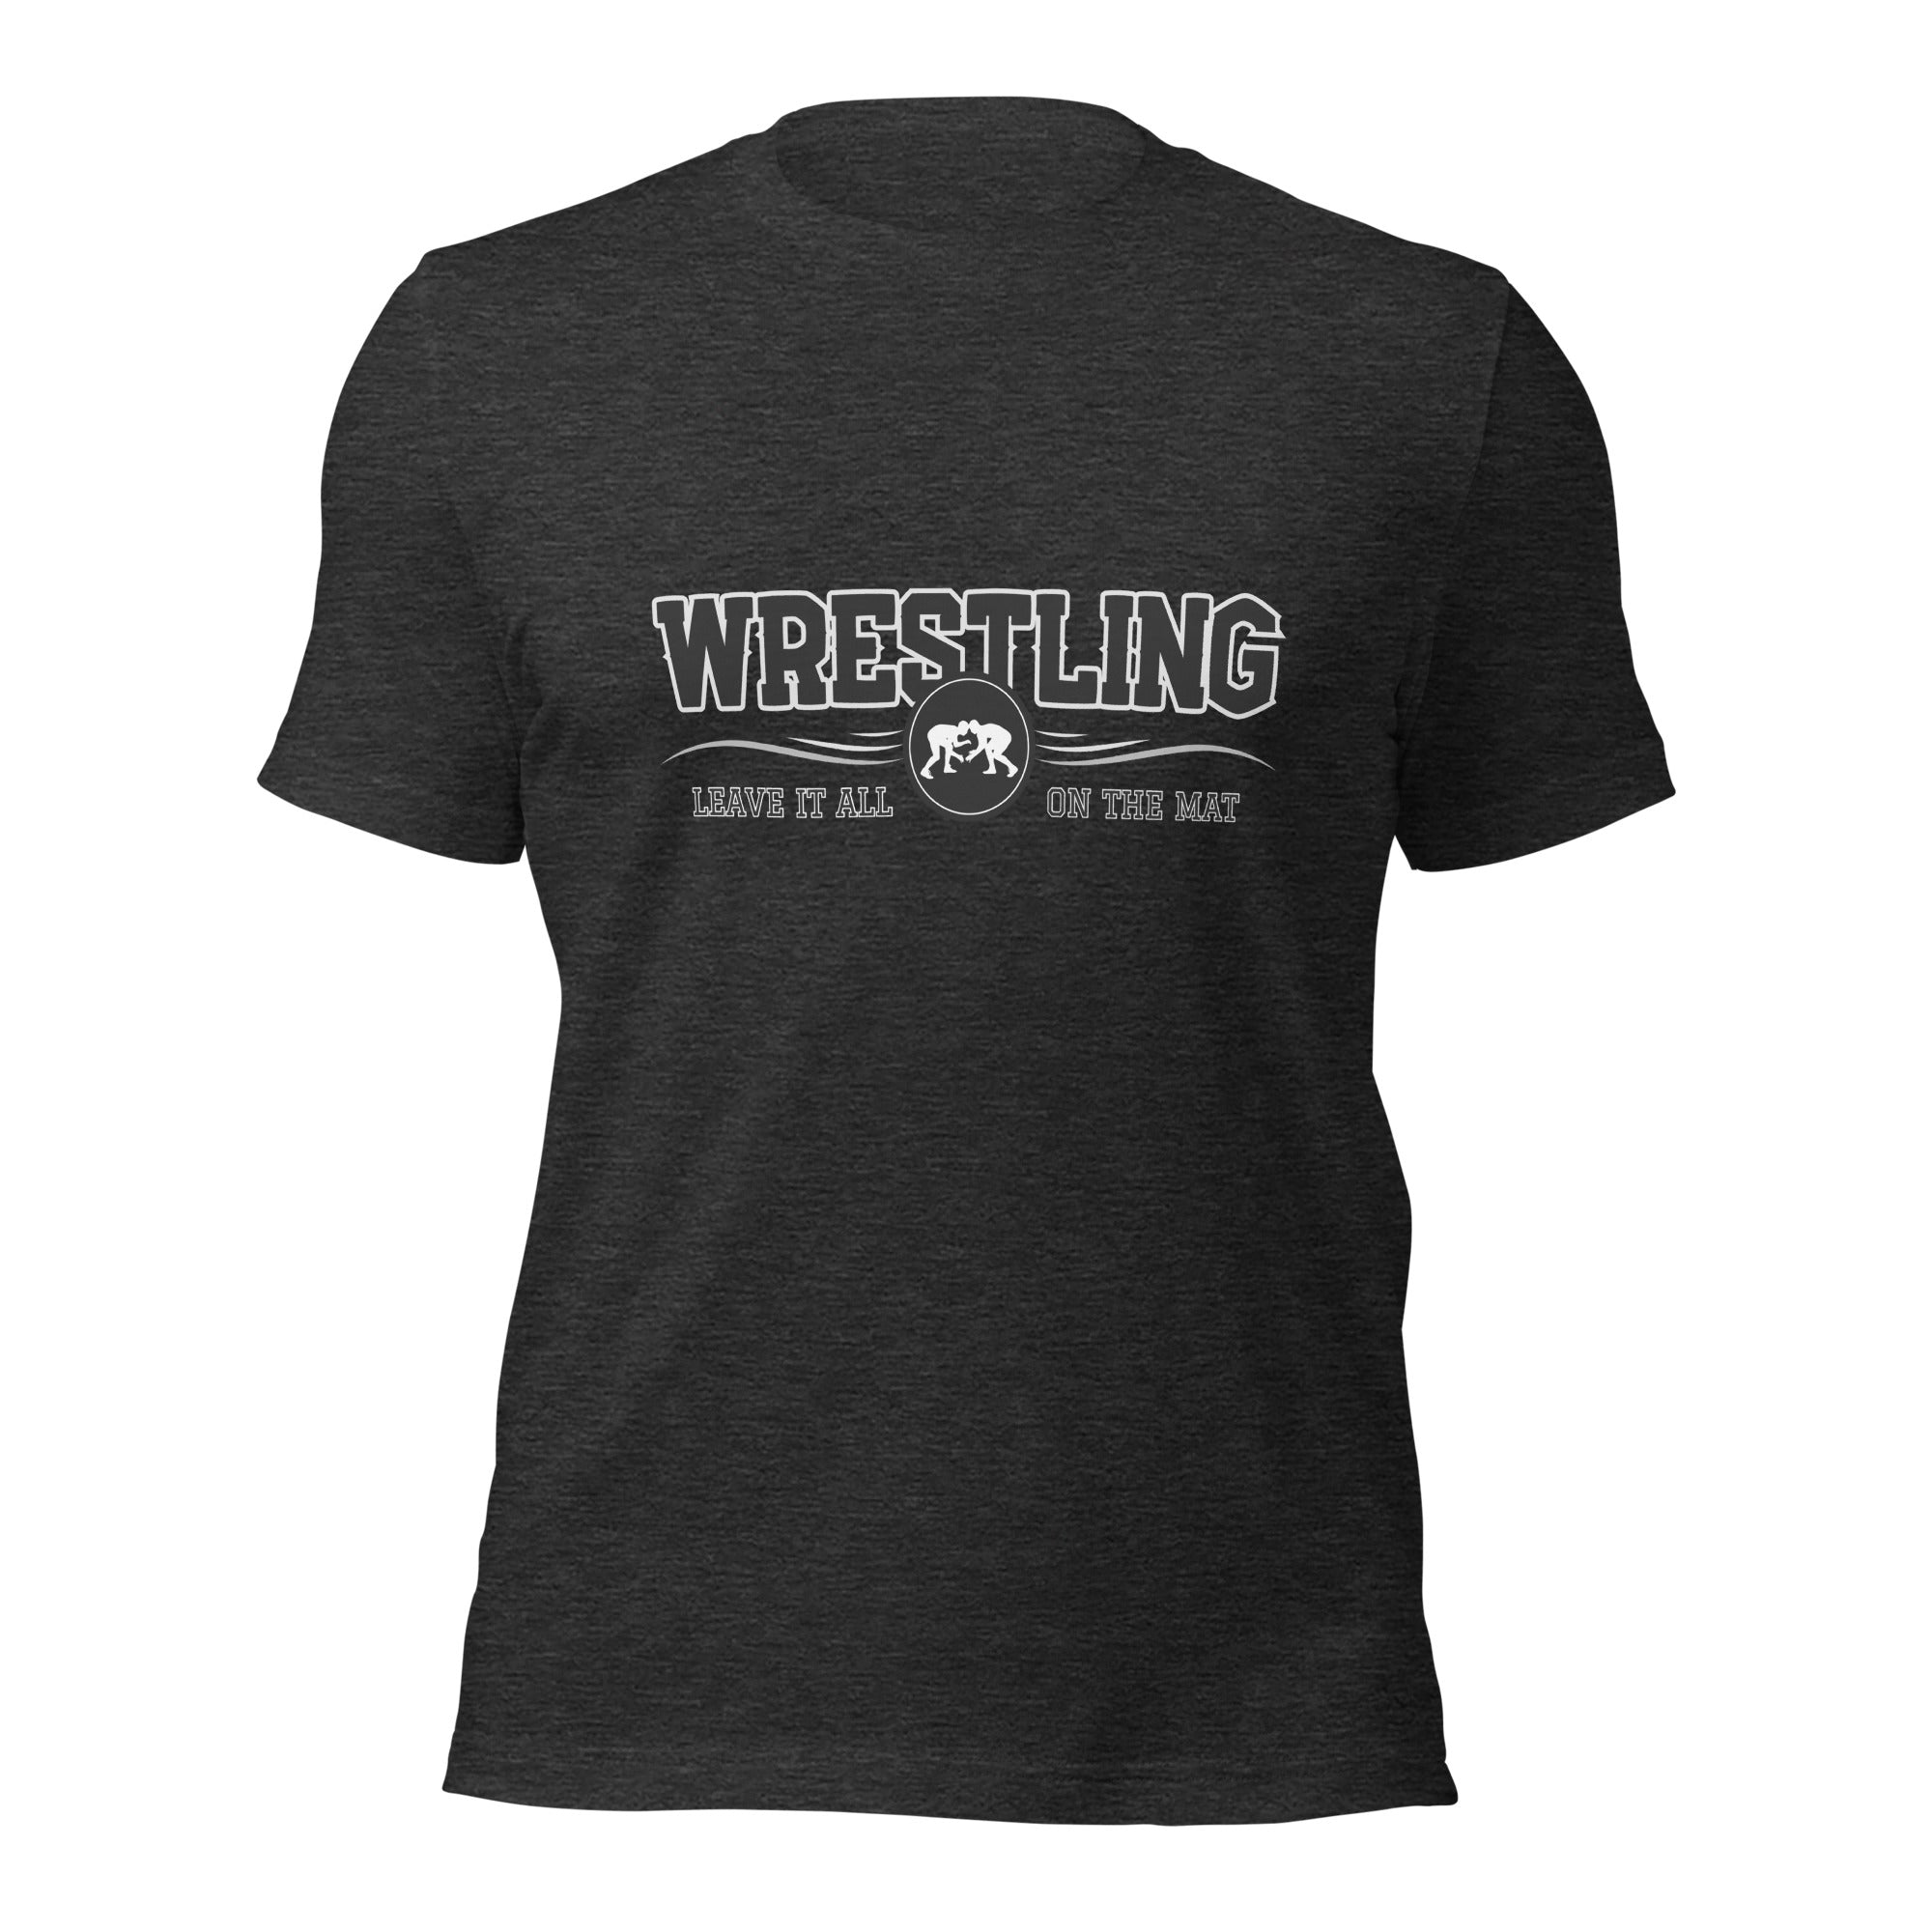 Leave It All On The Mat Staple T-shirt Iron Fist Wrestling Unisex Staple T-Shirt, Wrestling T-shirt